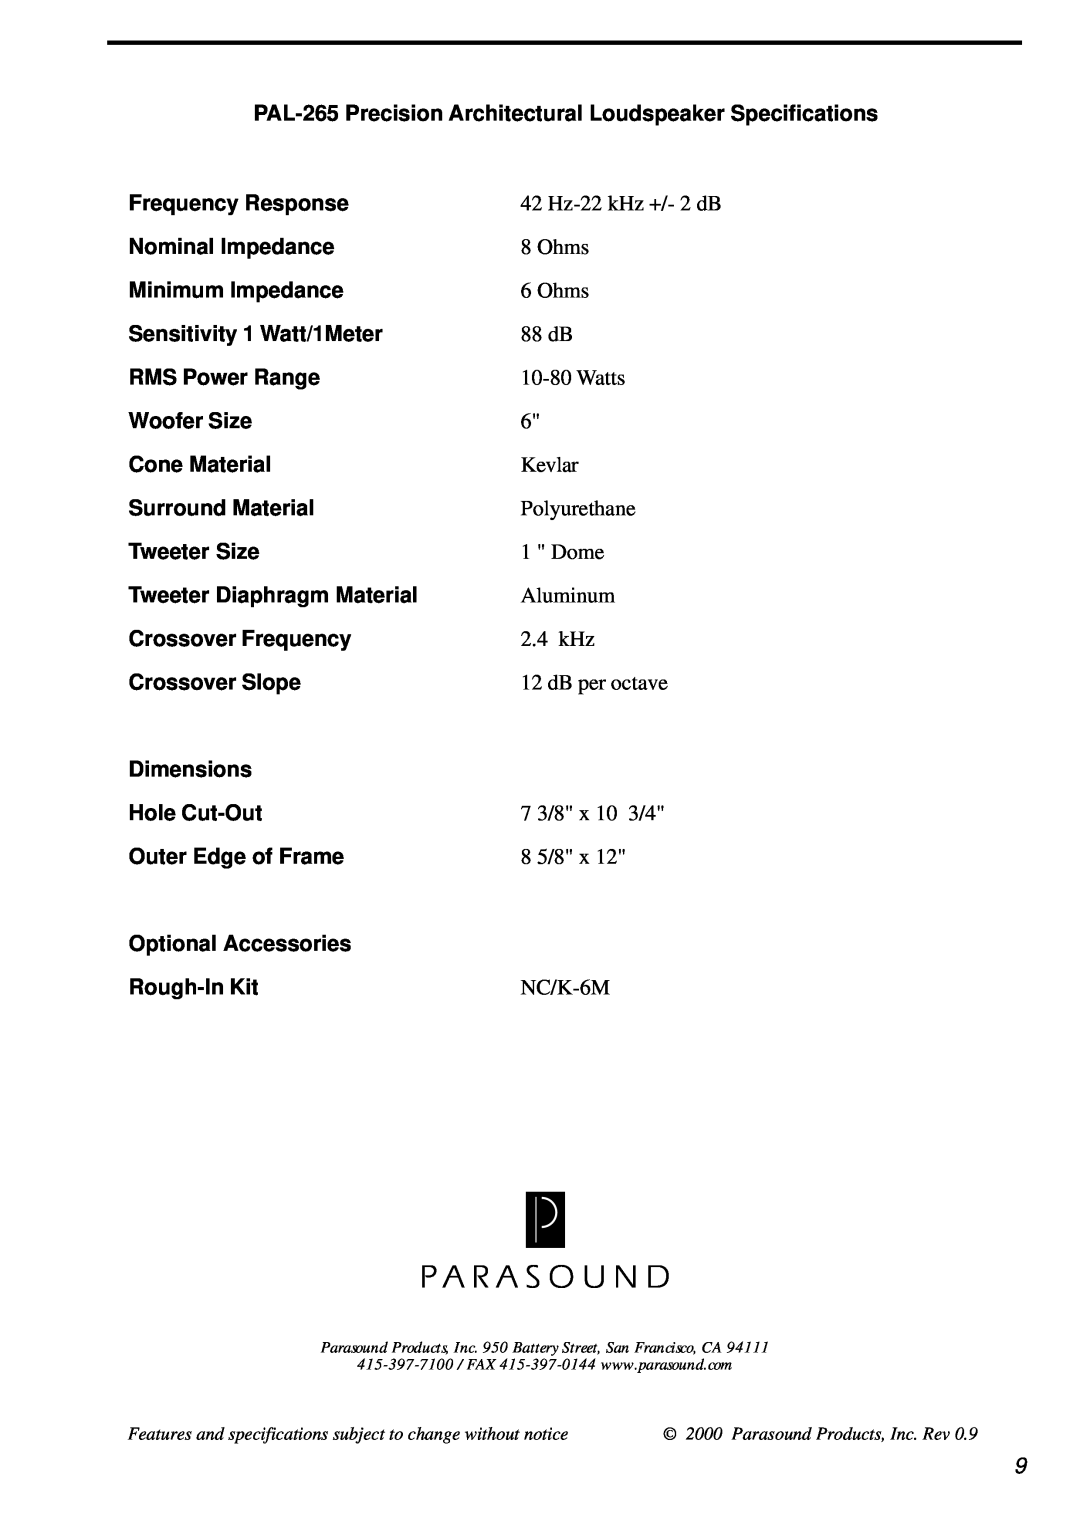 Parasound PAL-265 owner manual Frequency Response 